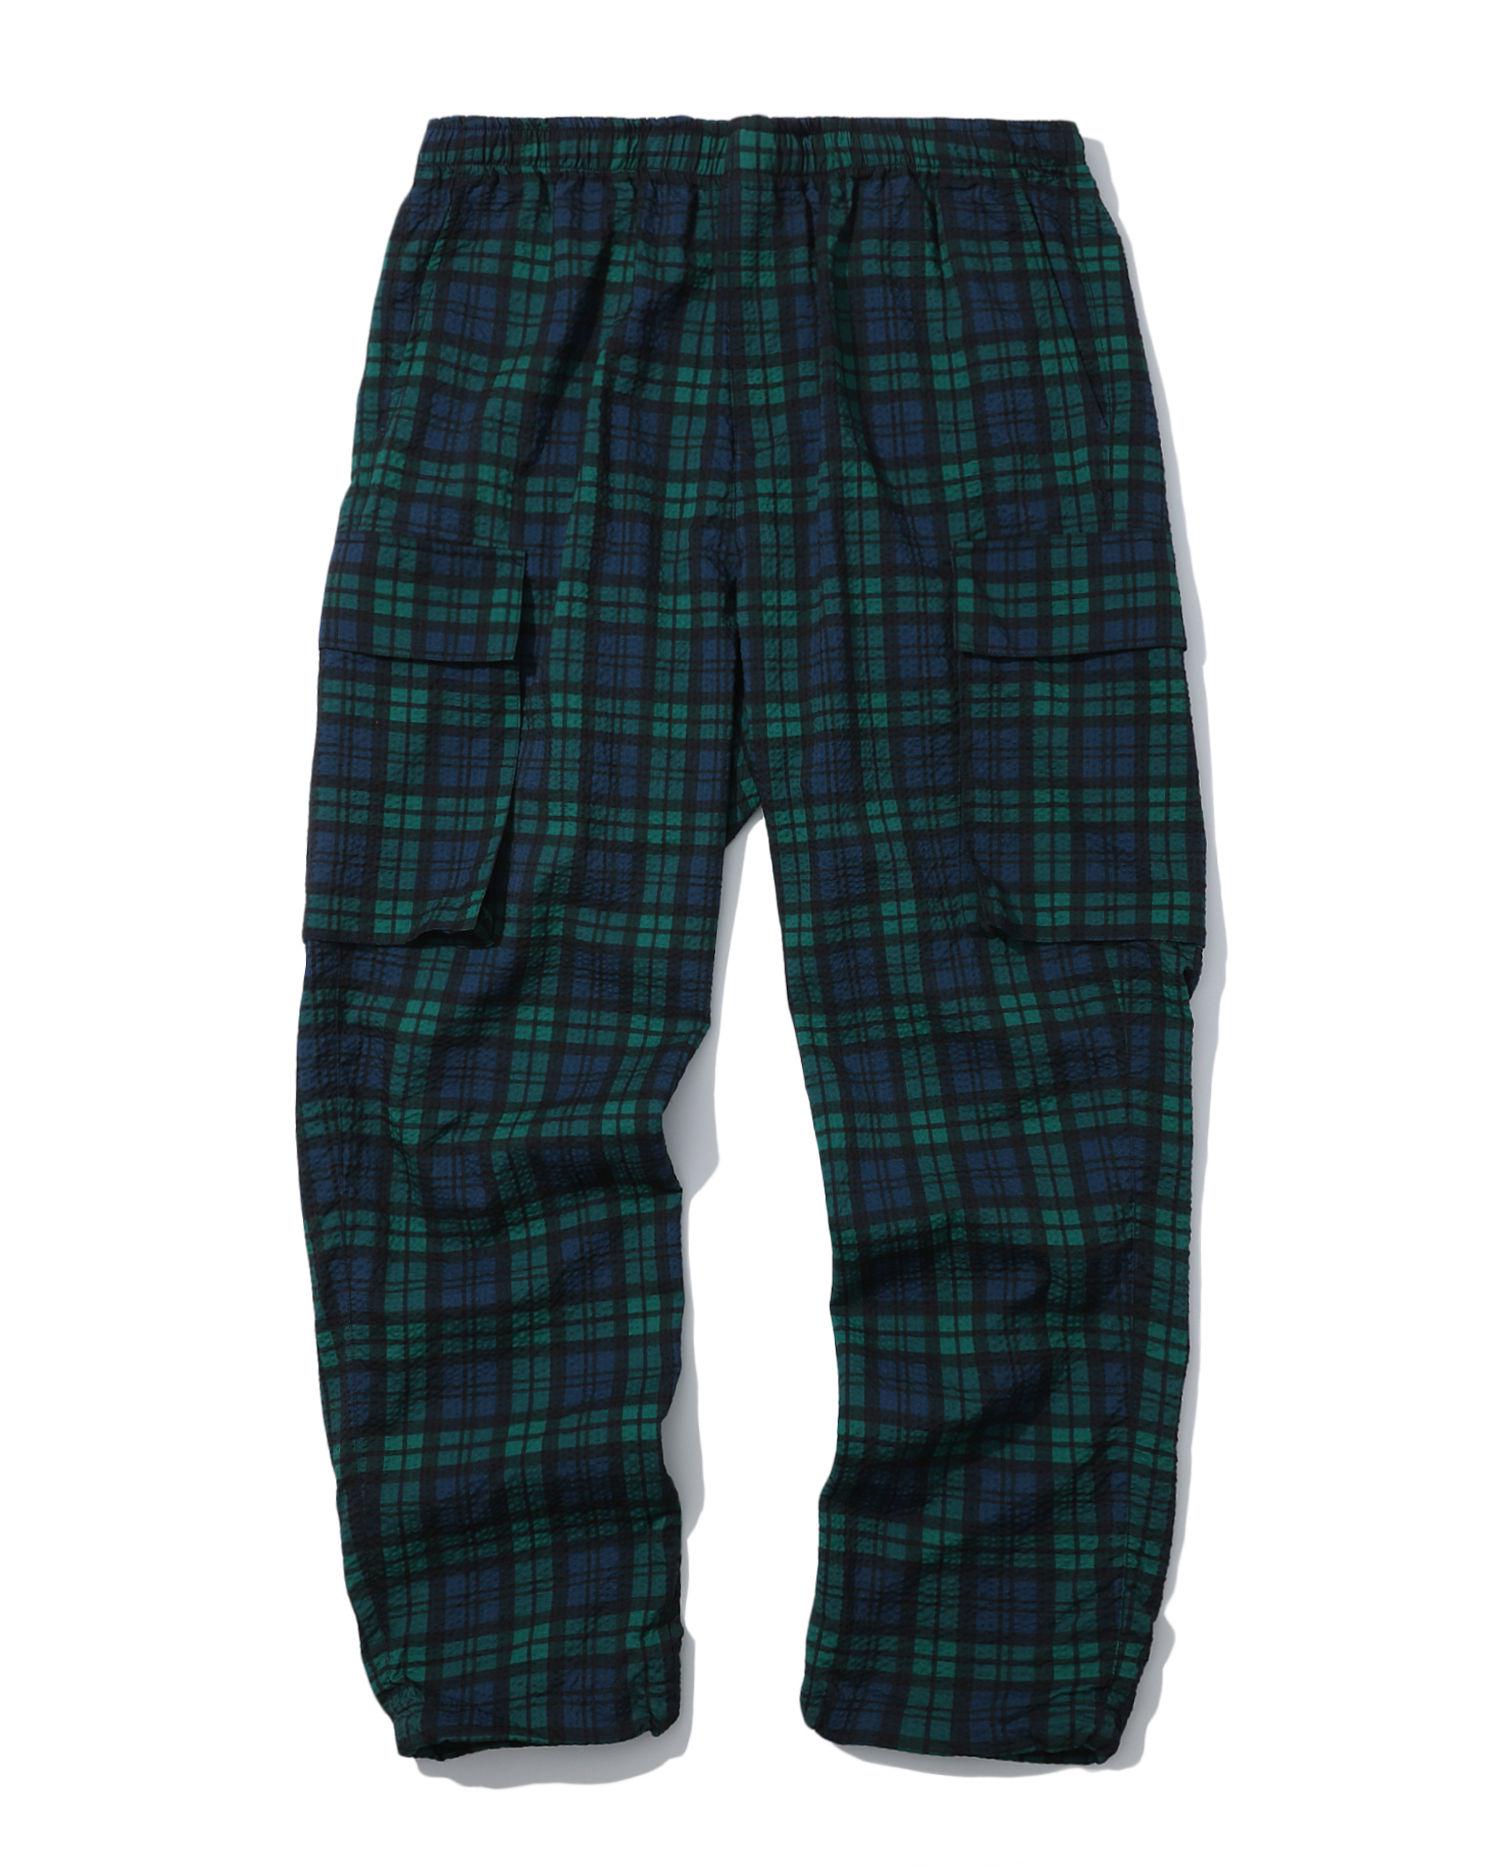 Plaid cargo pants by BEAMS